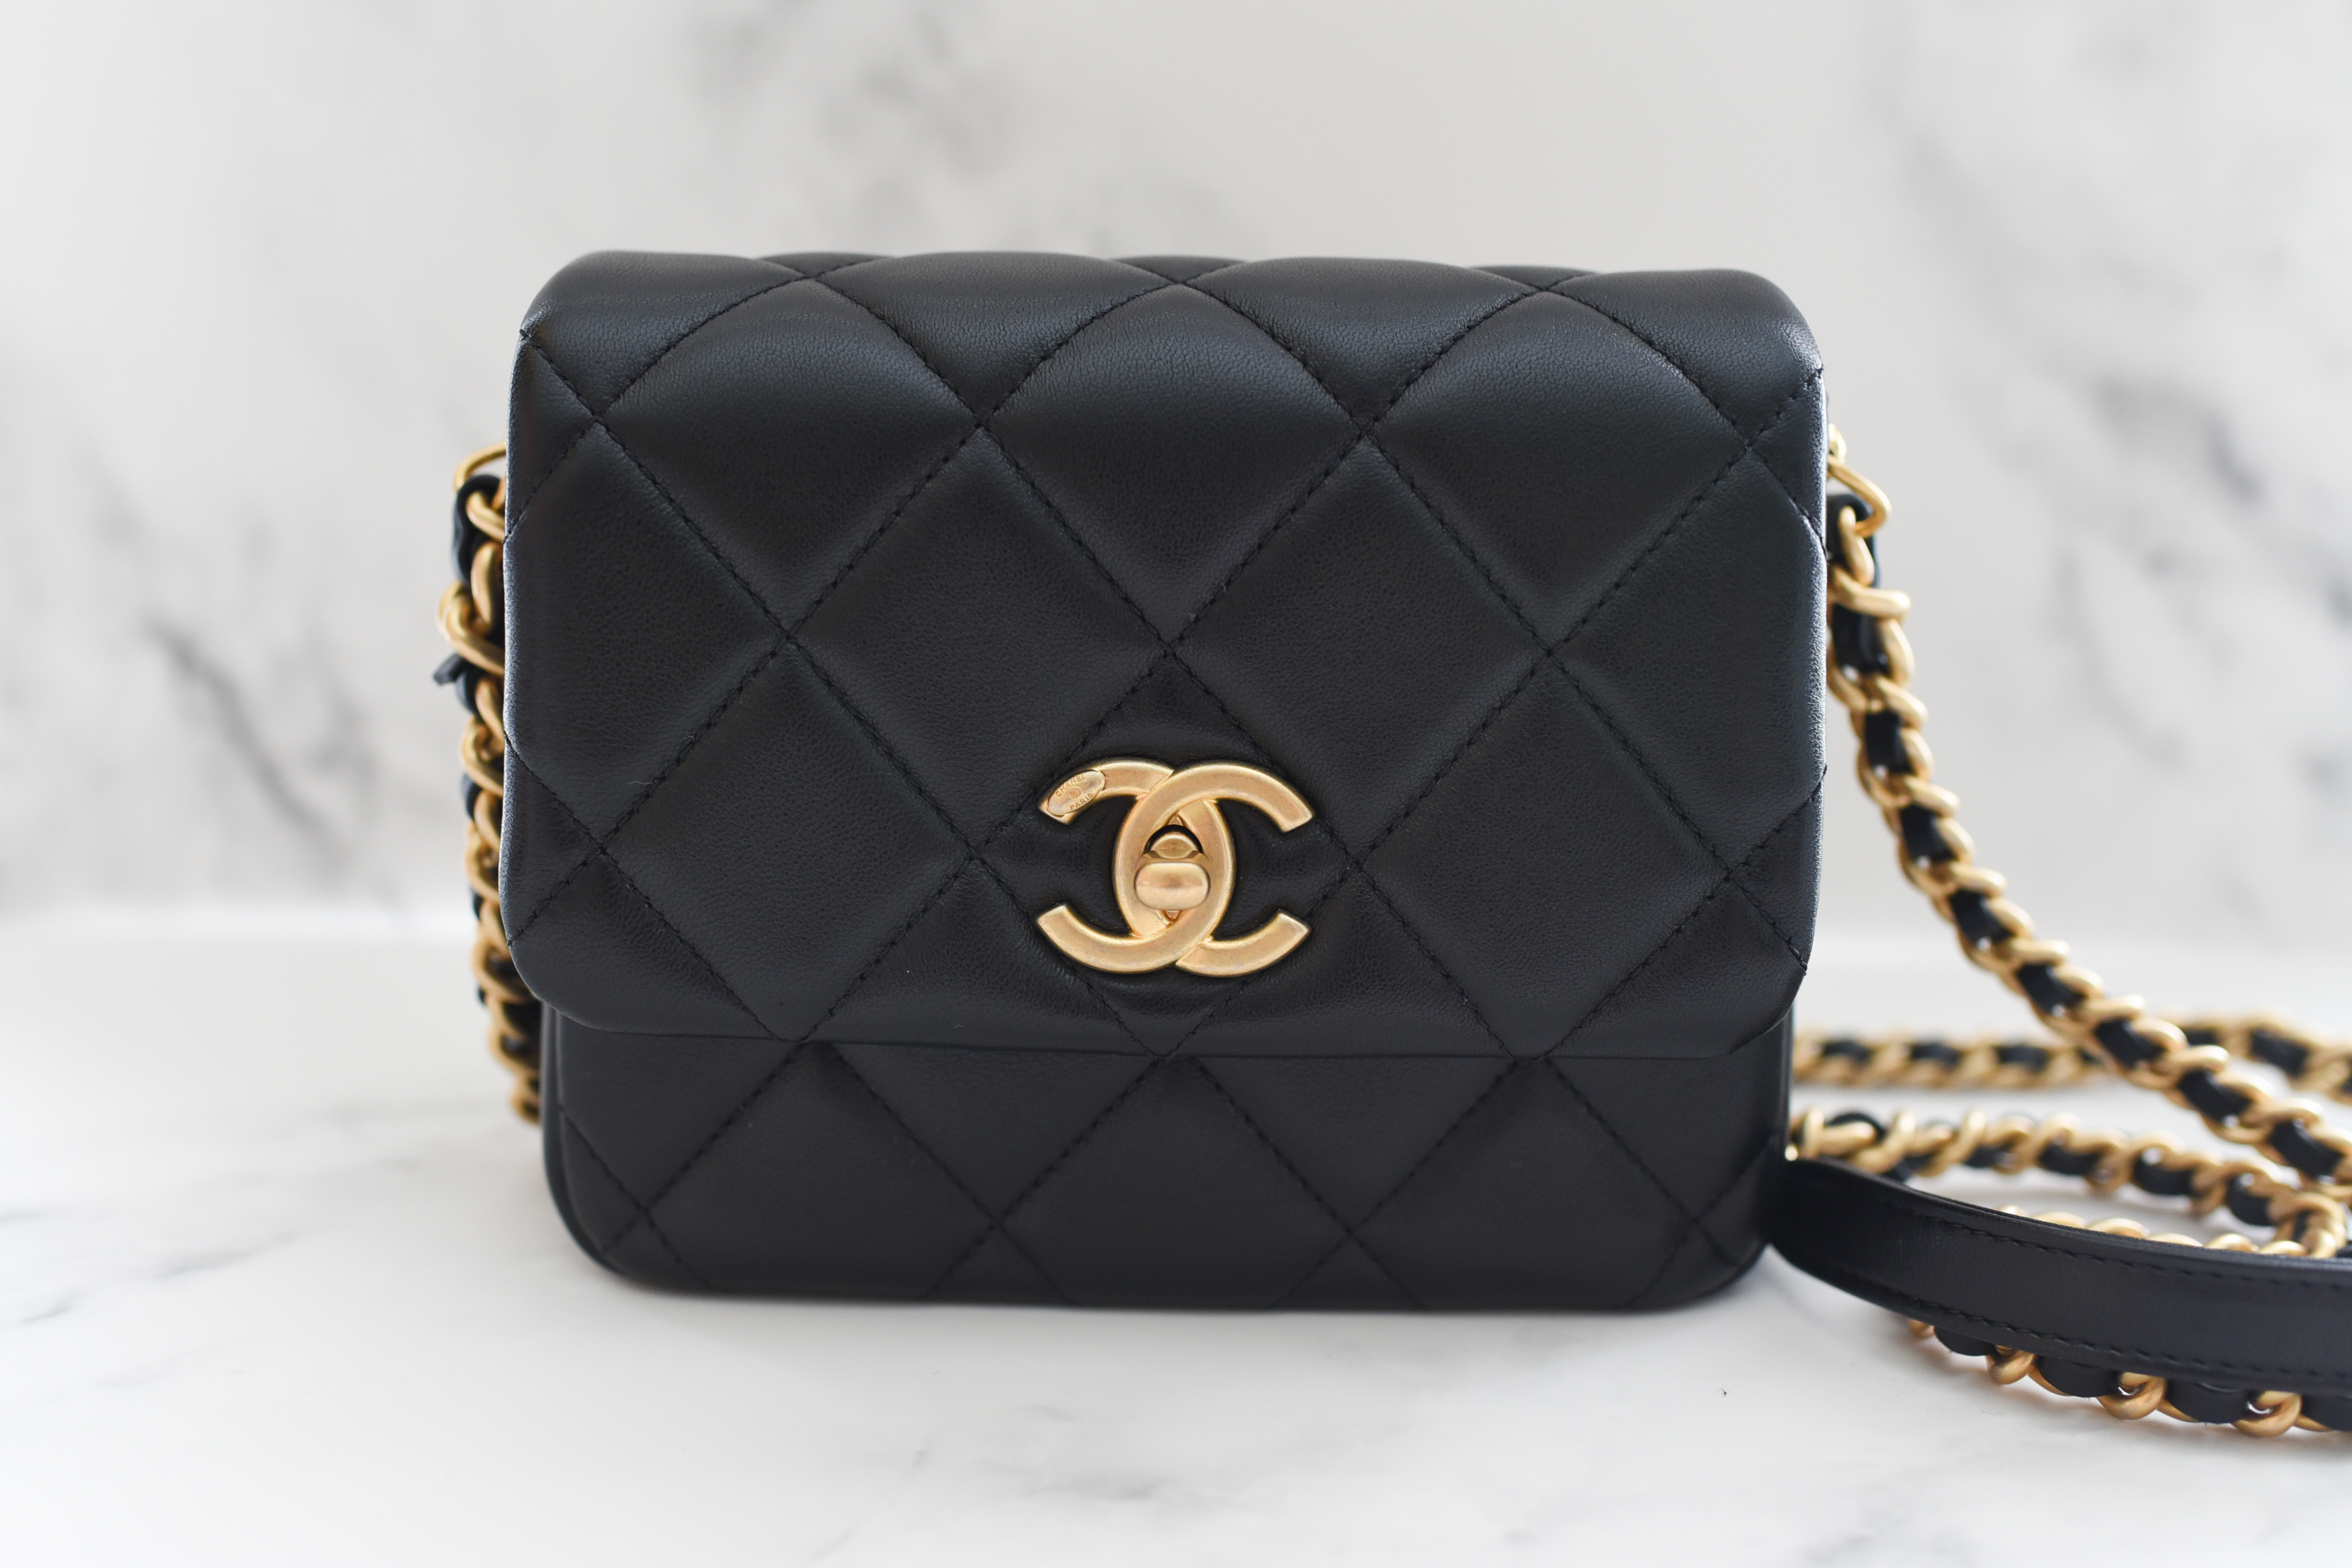 Chanel Quilted Side Note Flap Mini, Black Lambskin with Gold Hardware,  Black Lambskin with Gold Hardware, New in Box